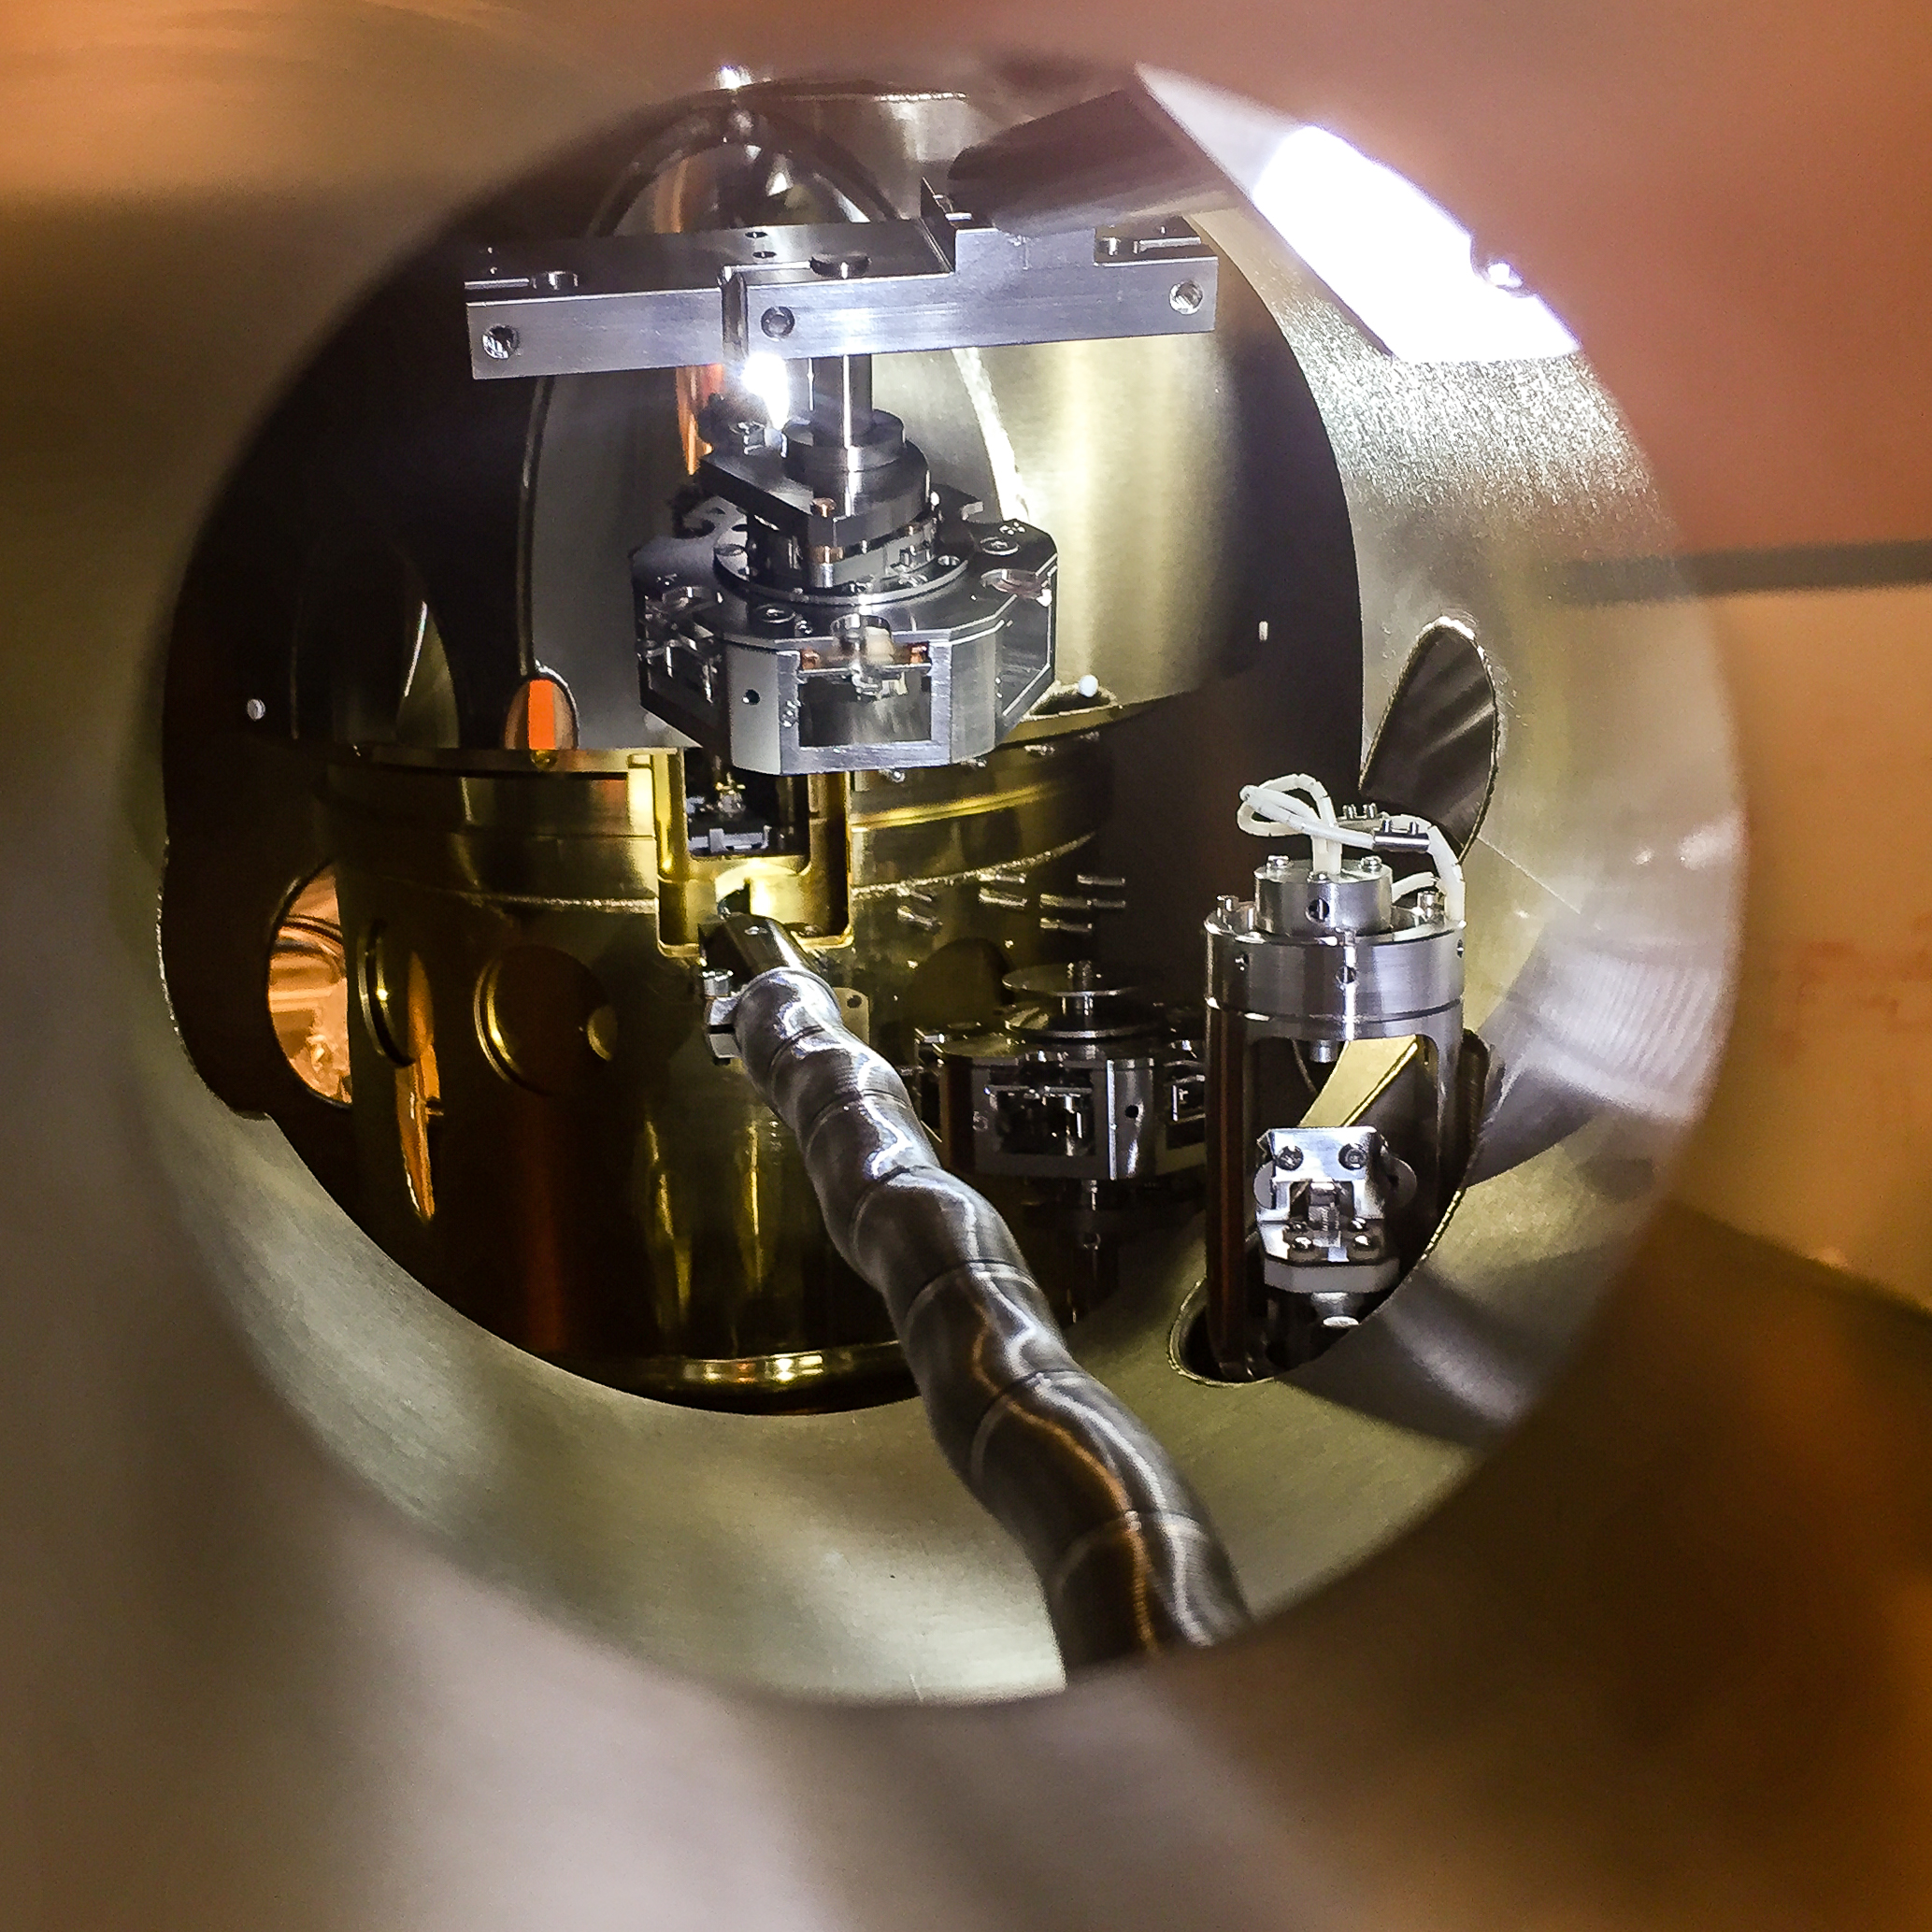 Inside a scanning tunneling microscope